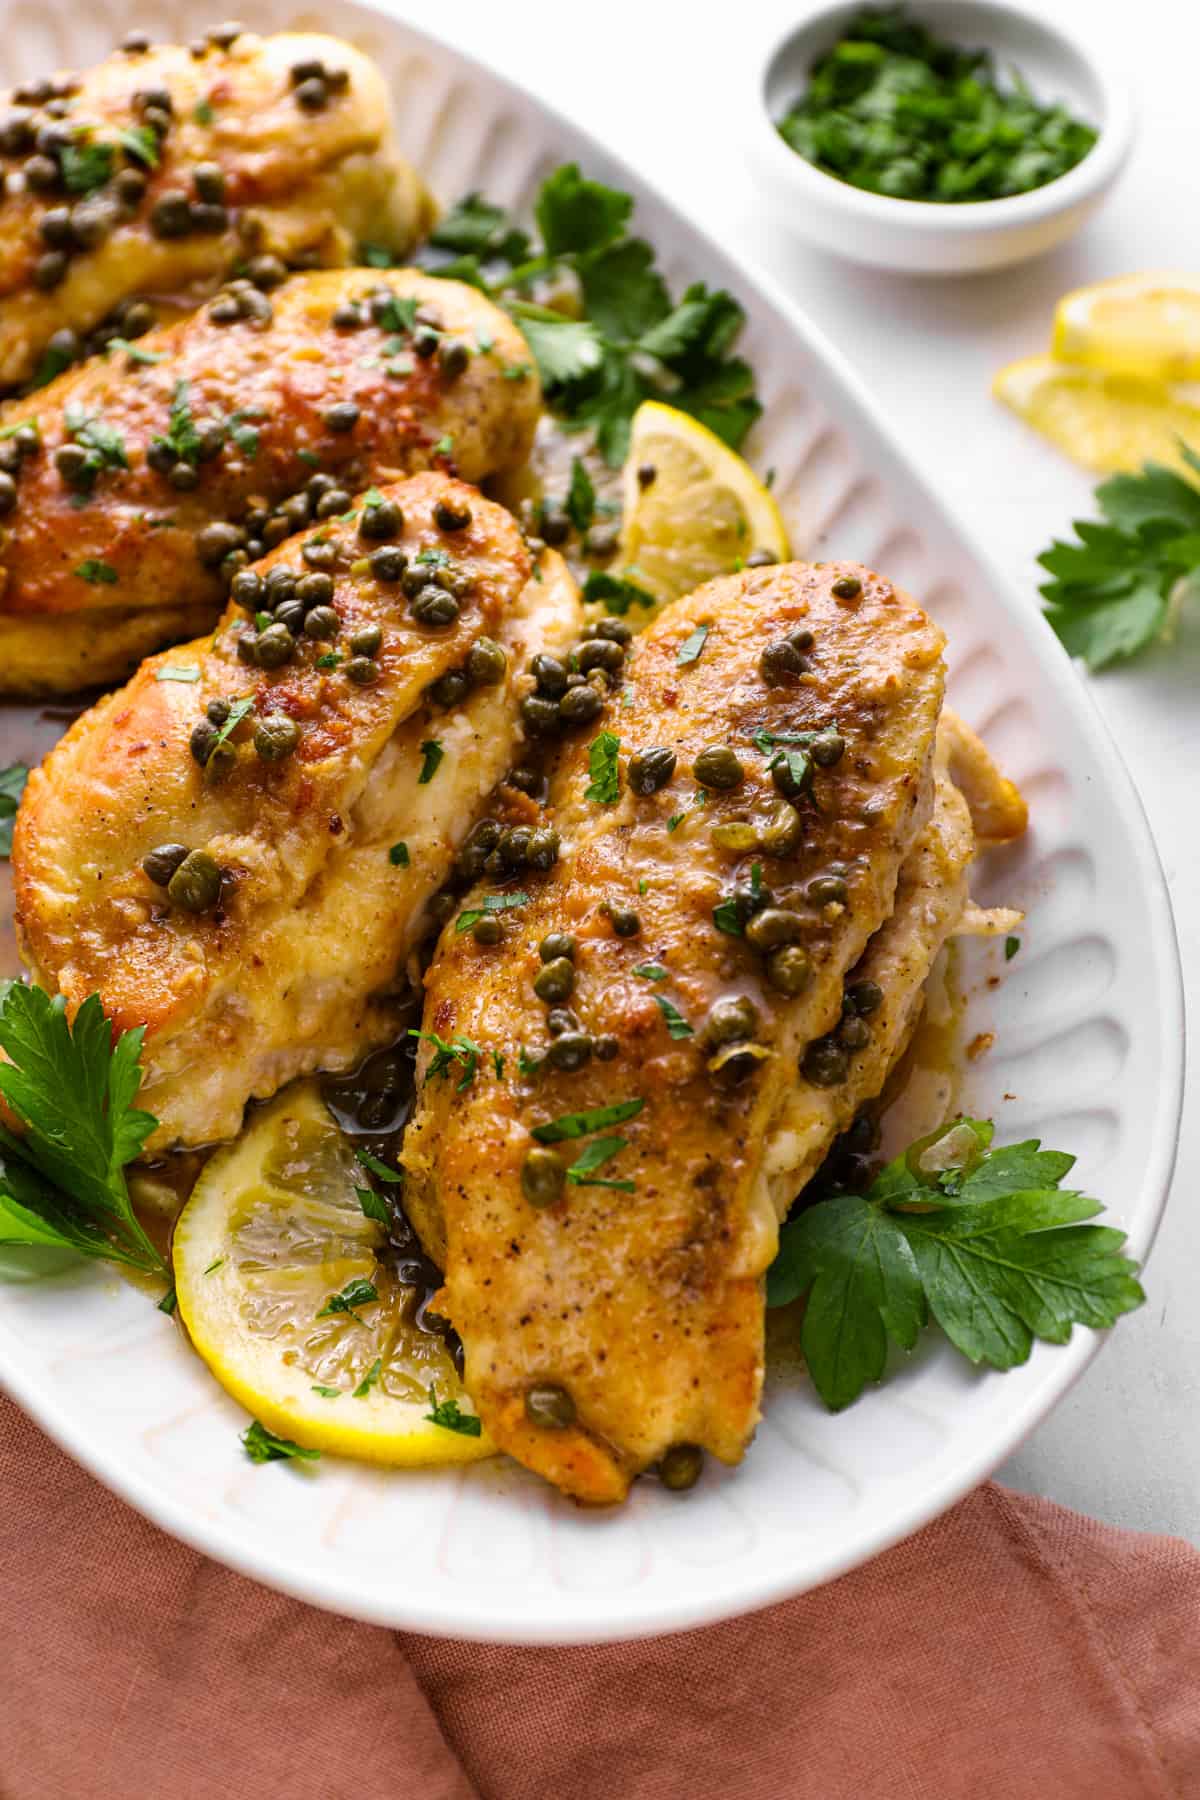 A serving platter of cheese stuffed chicken breasts with piccata sauce.